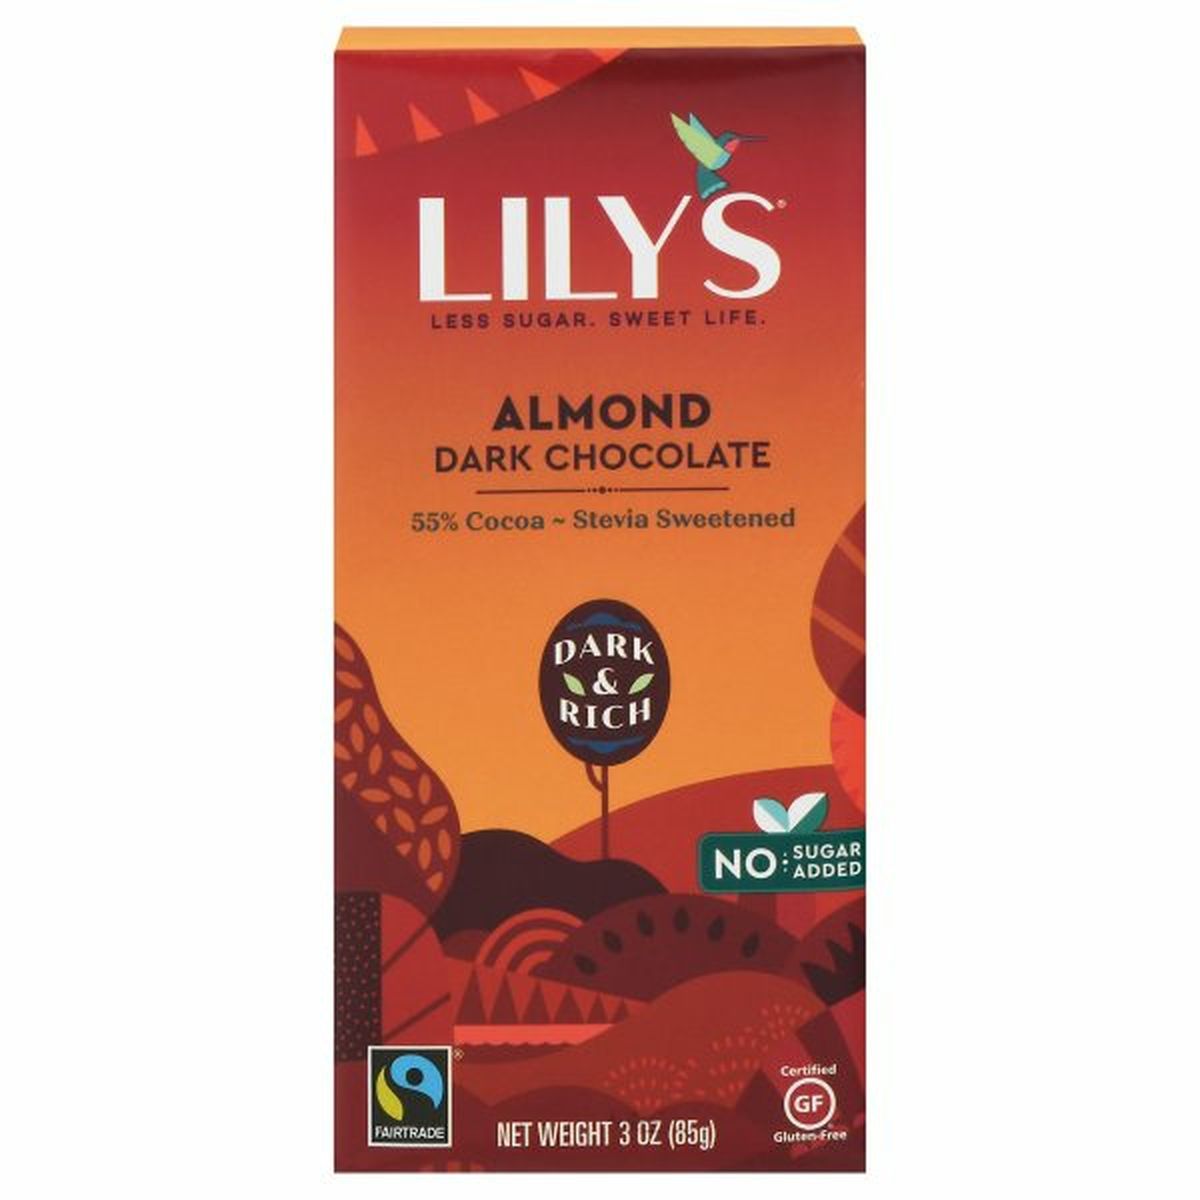 Calories in Lily's Dark Chocolate, Almond, 55% Cocoa